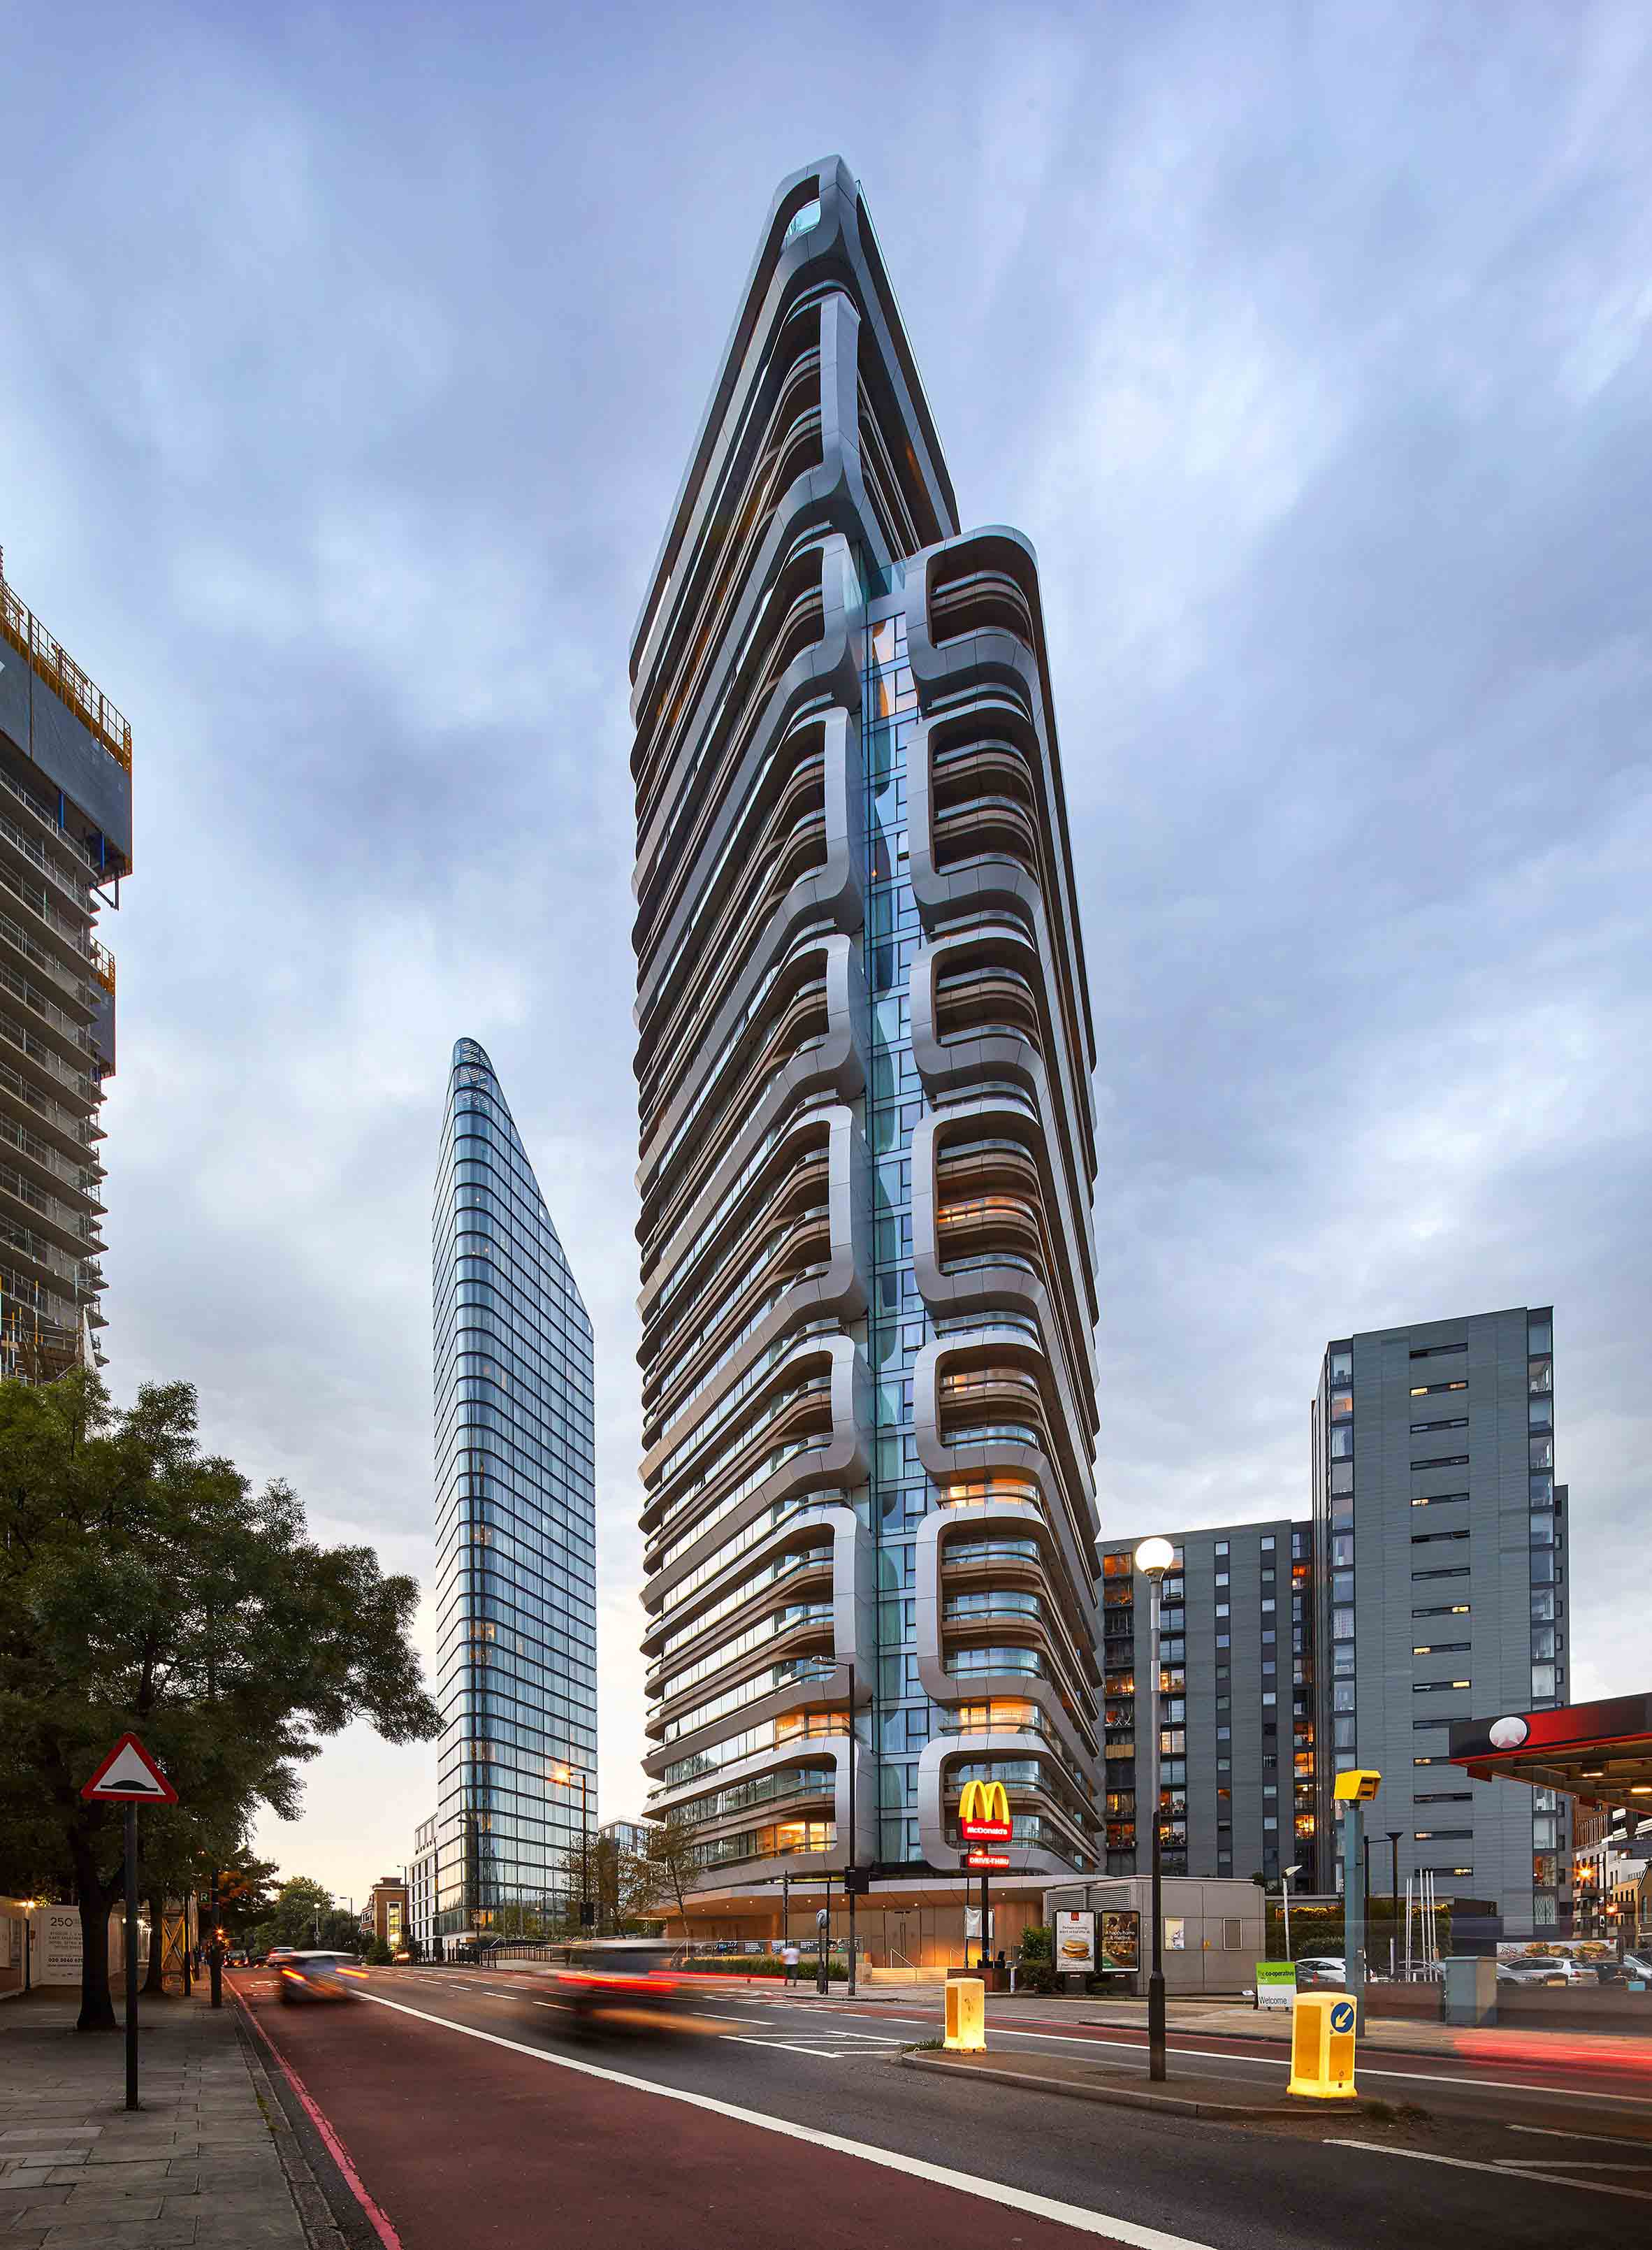 canaletto-tower-unstudio-architecture-residential-towers-uk_dezeen_2364_col_14.jpg